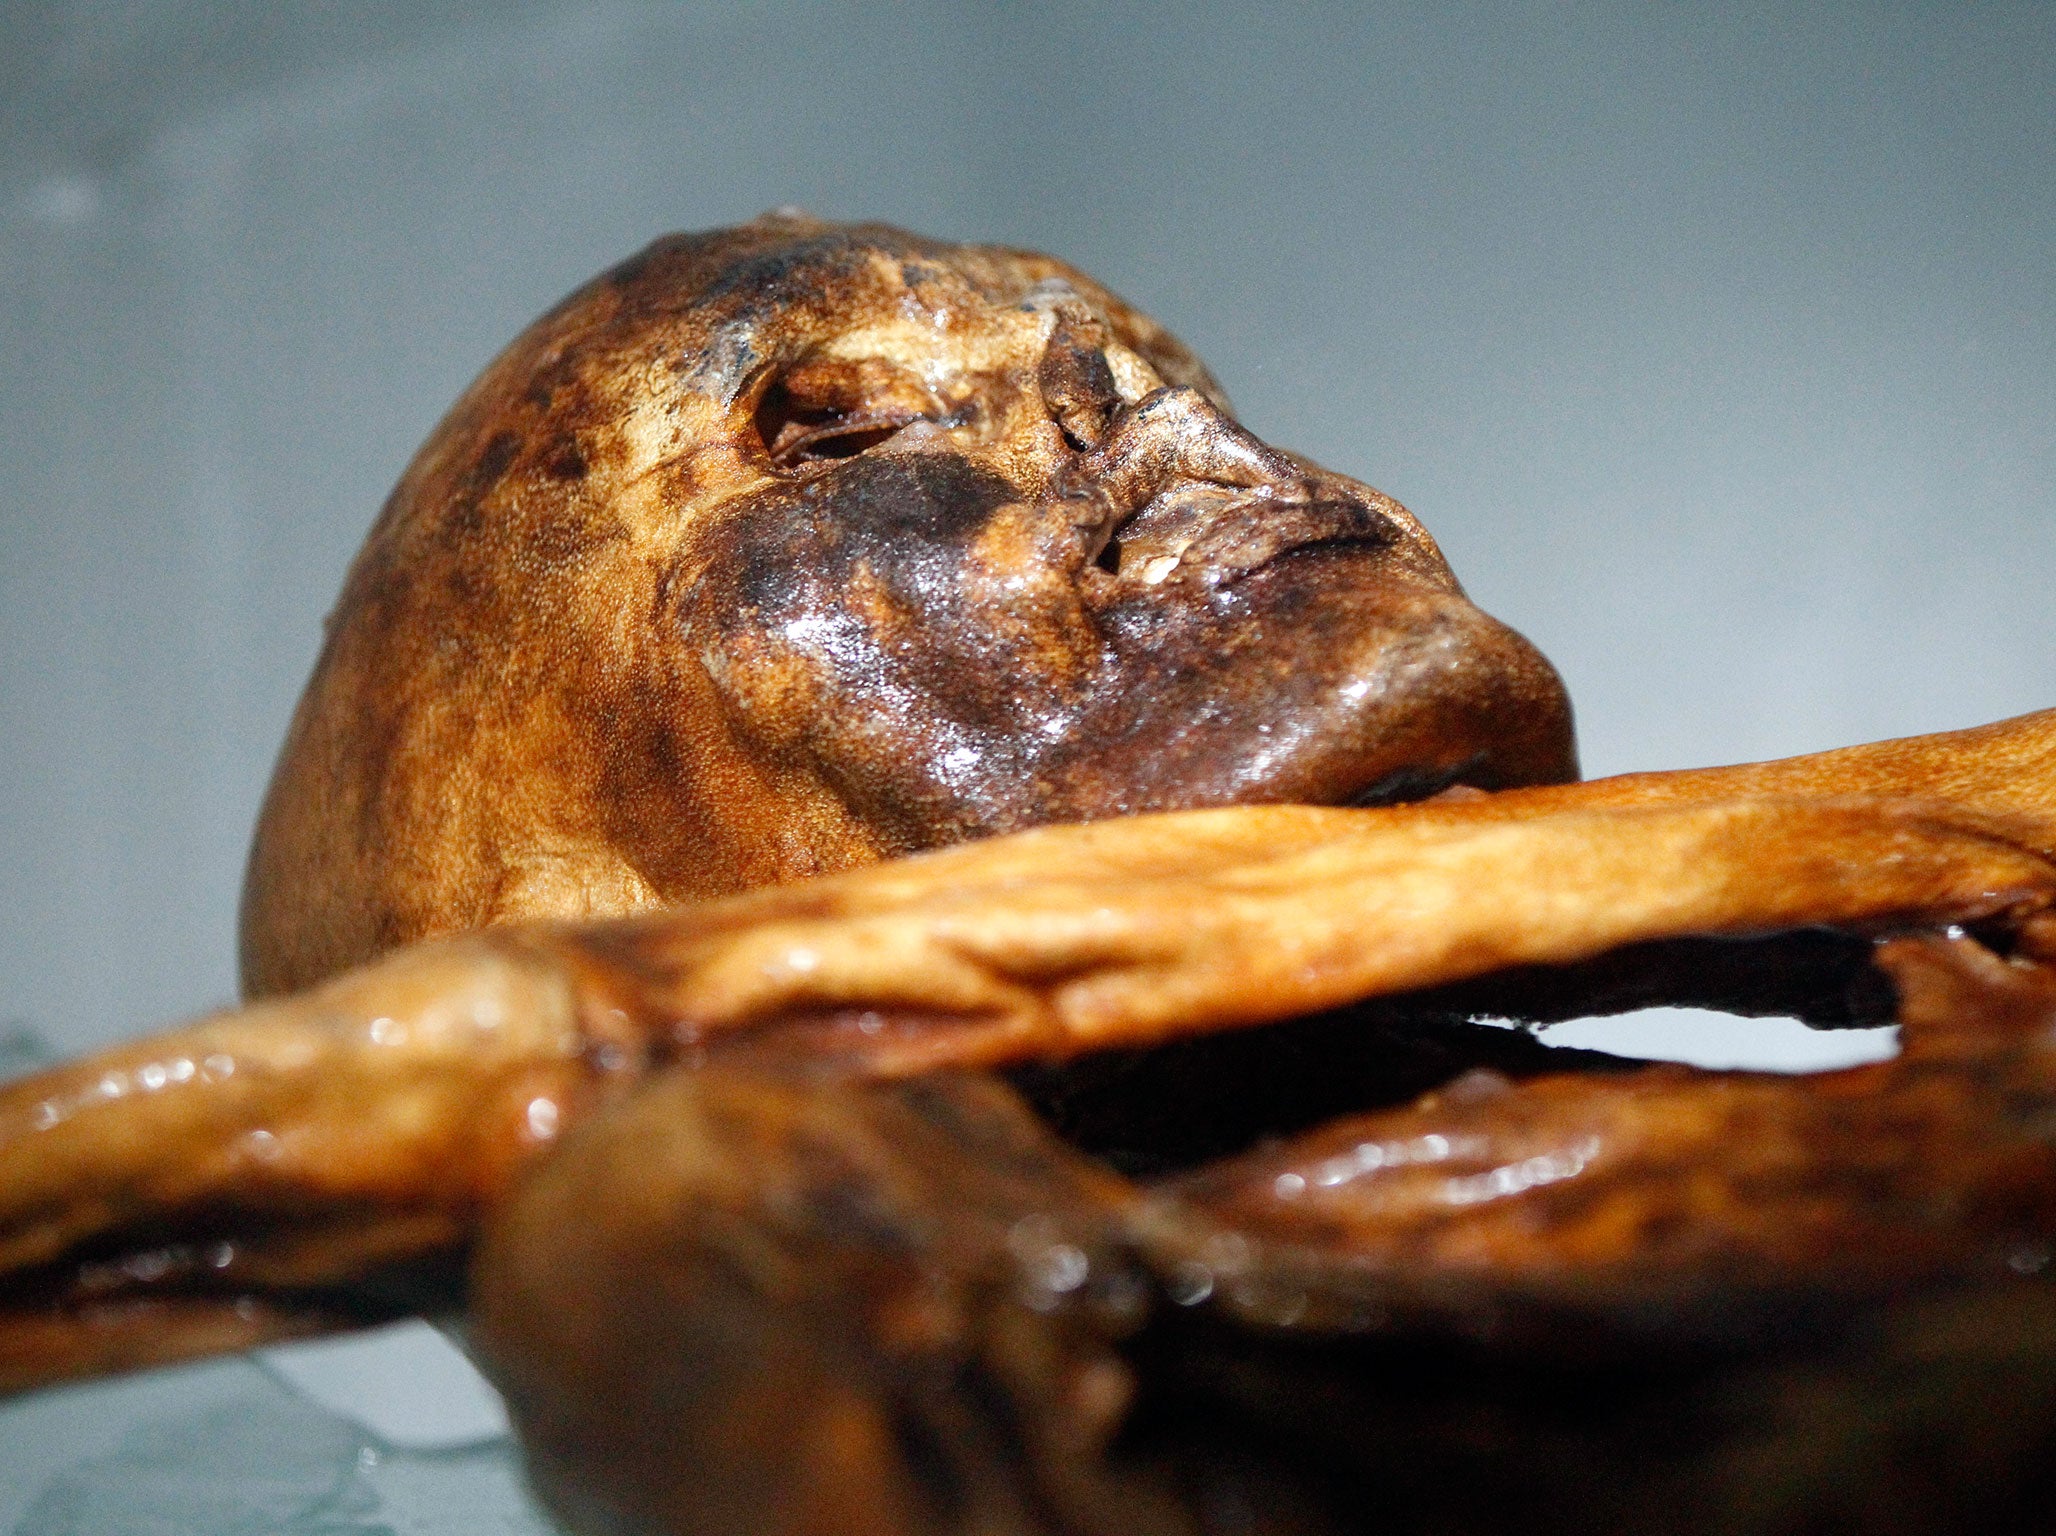 The mummy of an iceman named Otzi, discovered on 1991 in the Italian Schnal Valley glacier, is displayed at the Archaeological Museum of Bolzano on February 28, 2011 during an official presentation of the reconstrution